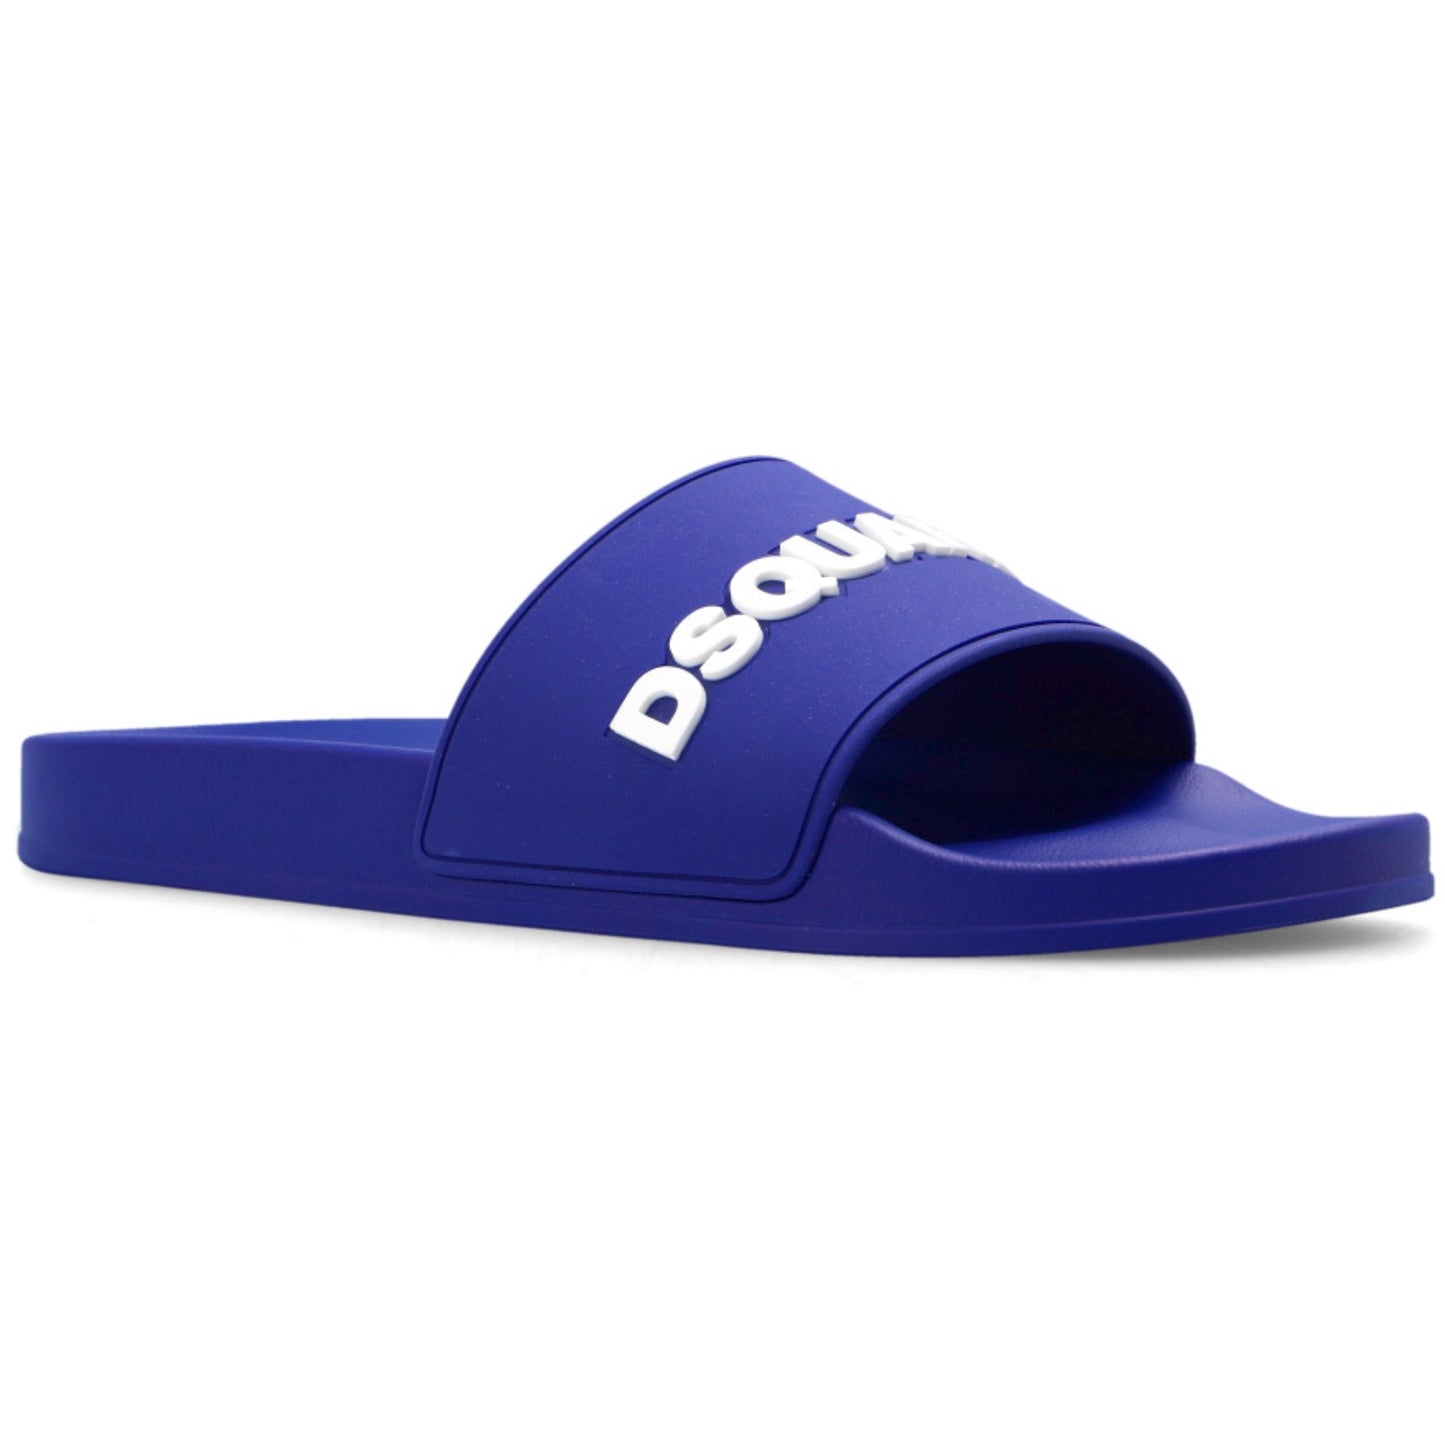 Blu slides with a raised logo in white from DSQUARED2. Made of rubber.